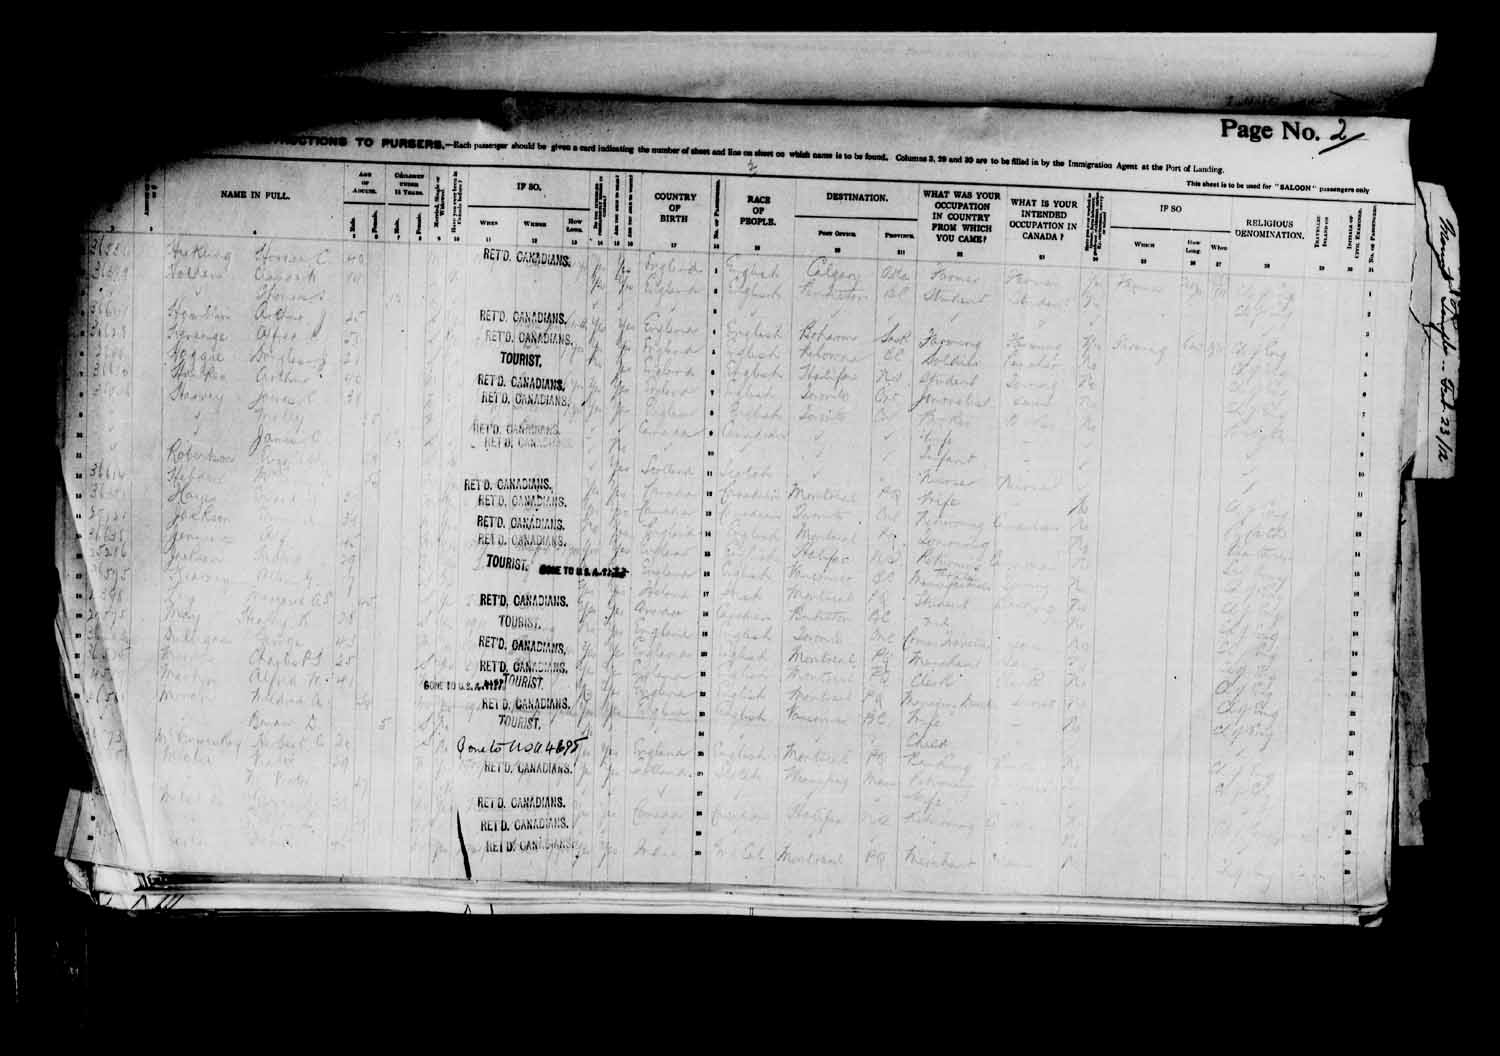 Digitized page of Passenger Lists for Image No.: e003627169